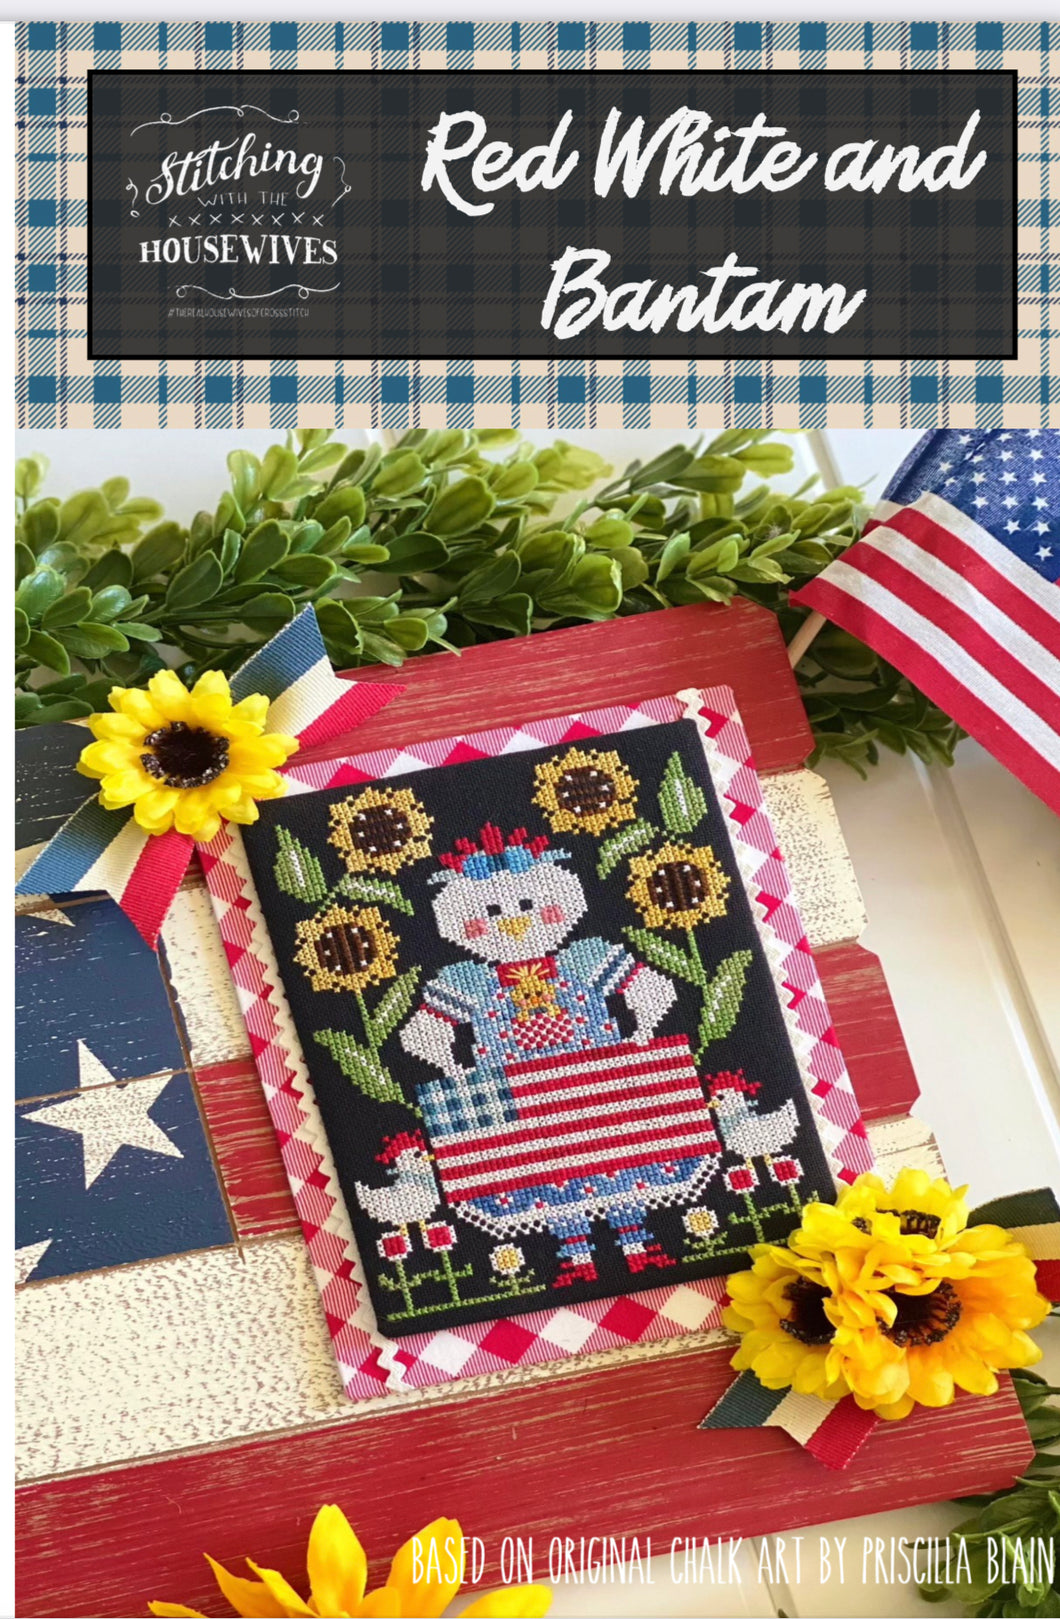 Red White and Bantam by Stitching with the Housewives